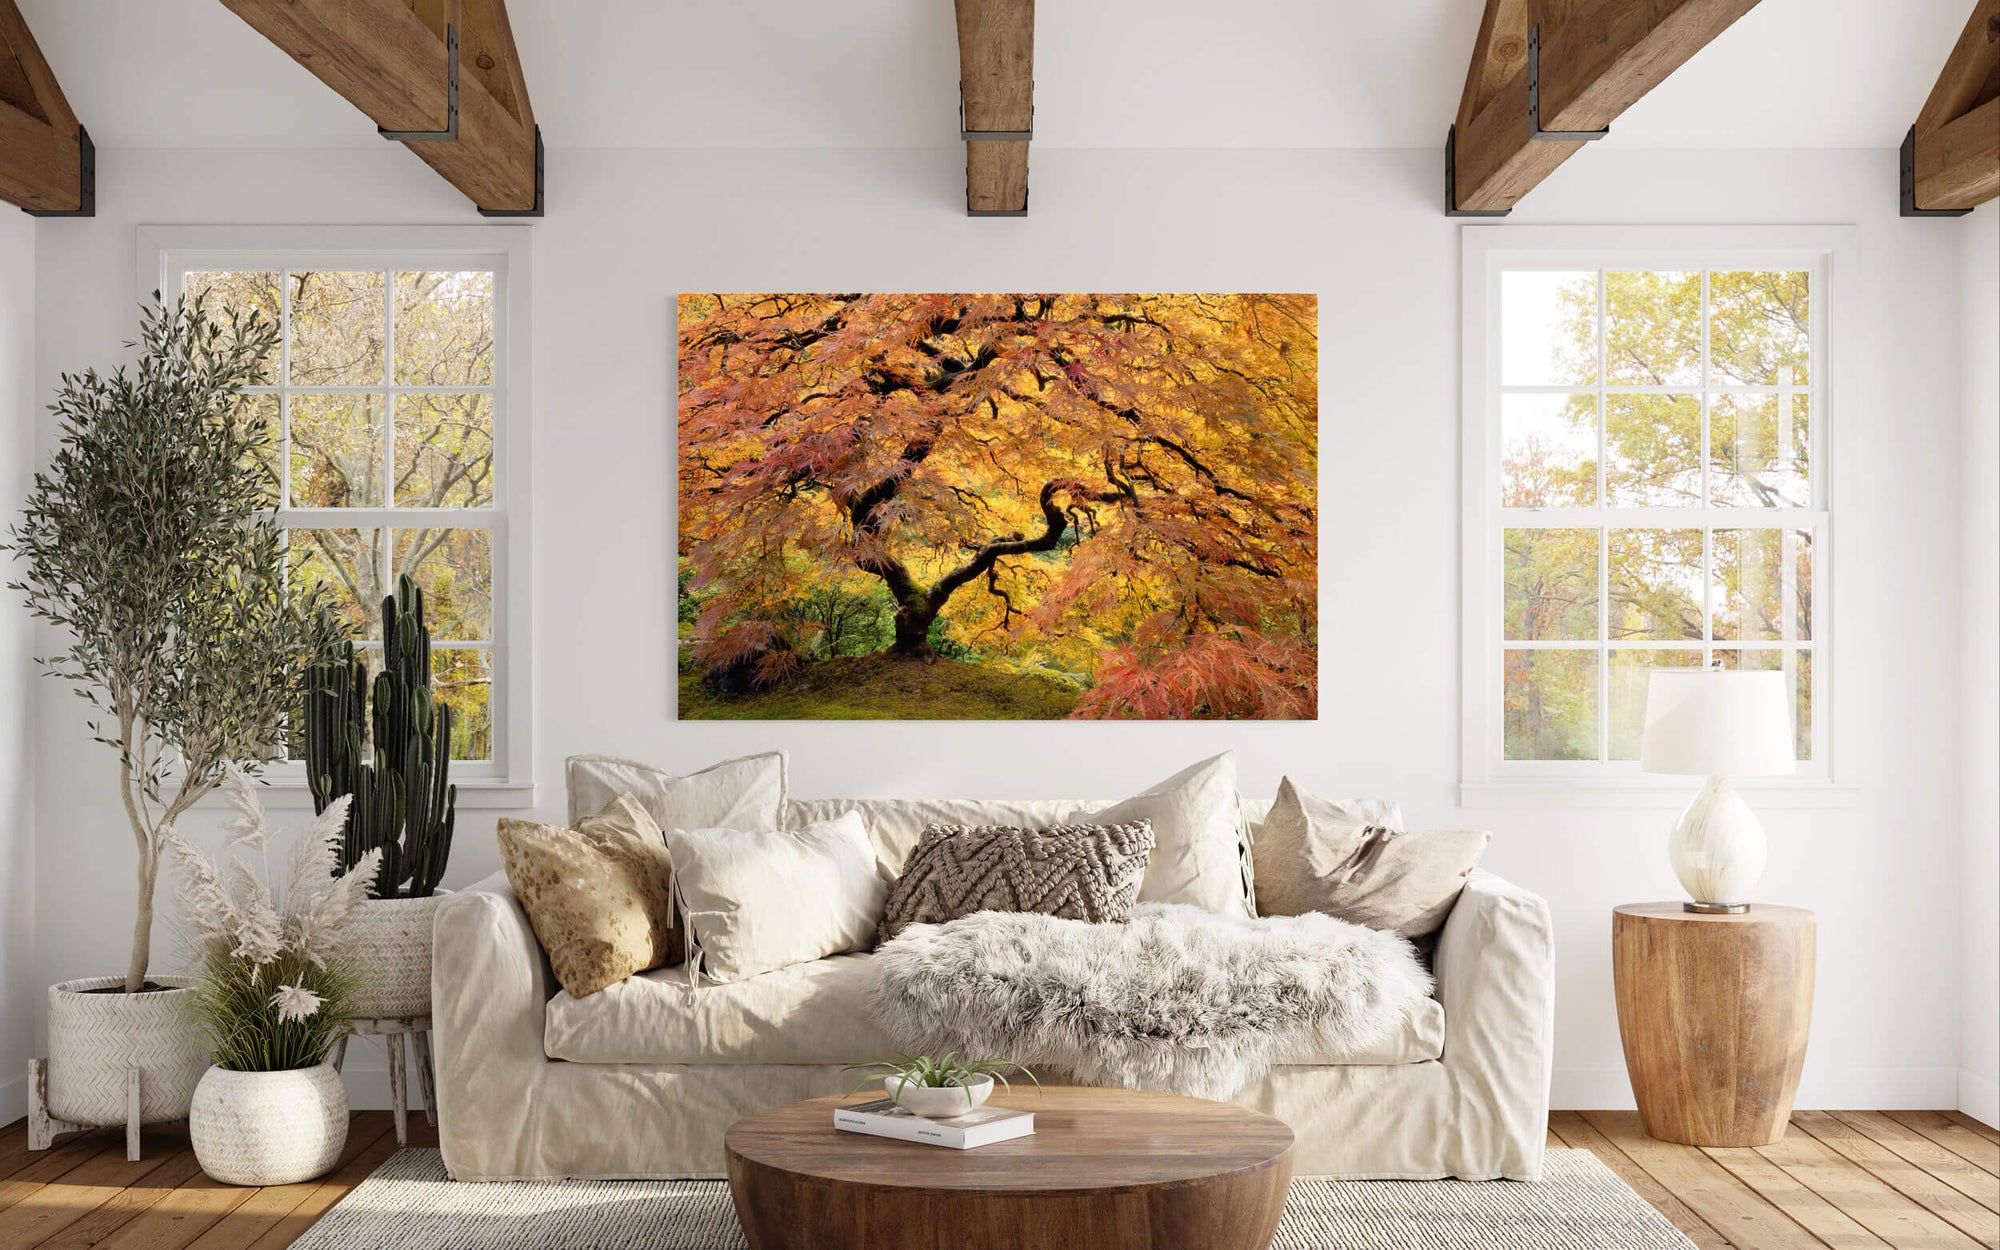 A piece of Japanese Garden art showing the famous maple tree in Portland hangs in a living room.